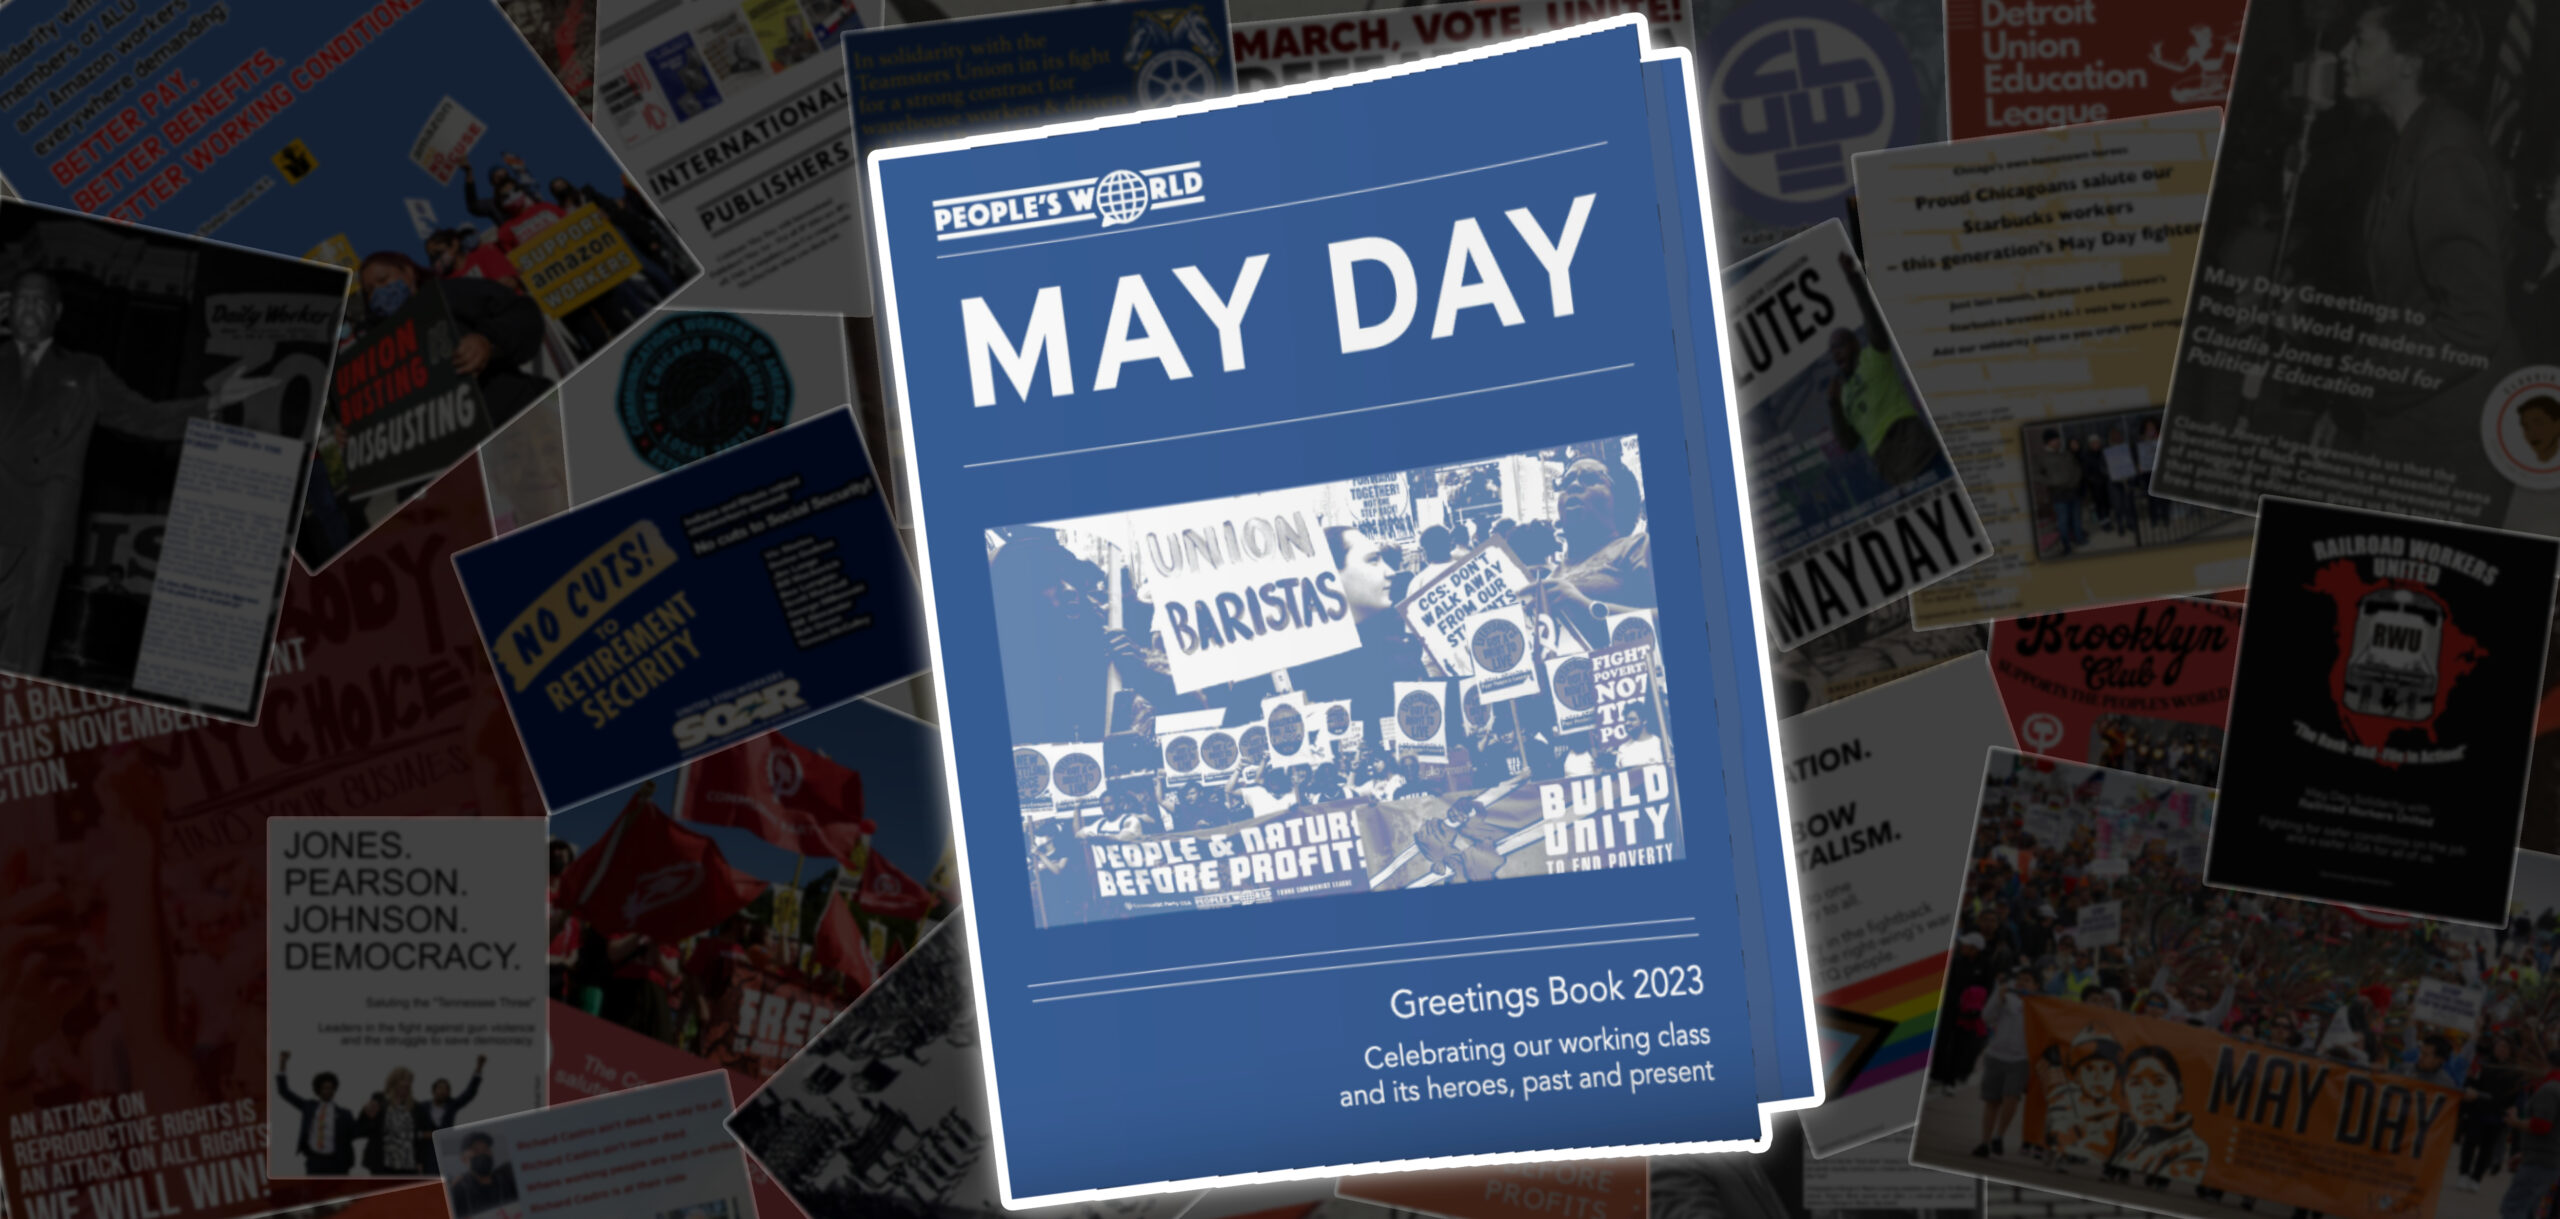 May Day Greetings Book 2023: Honoring our working class heroes, past and present